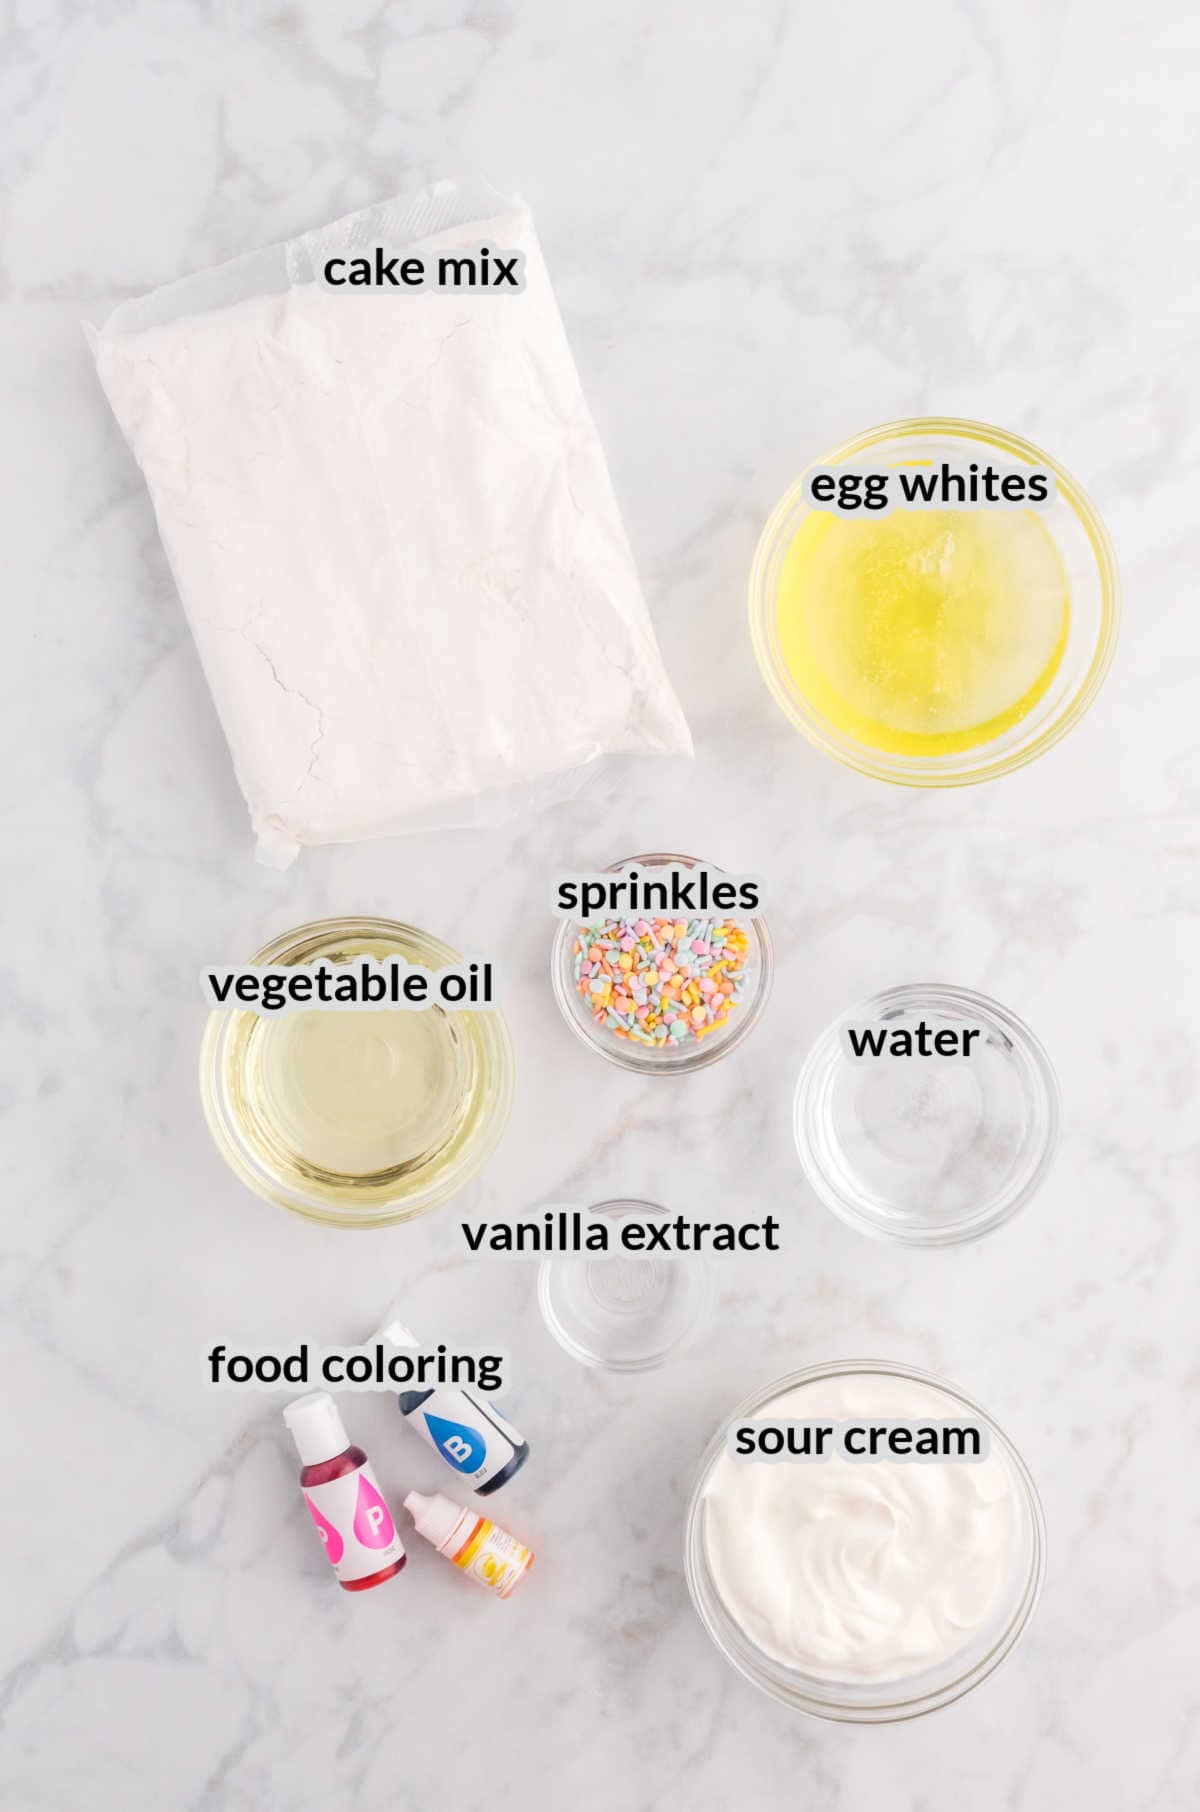 Overhead Image of the Swirled Easter Cake Ingredients